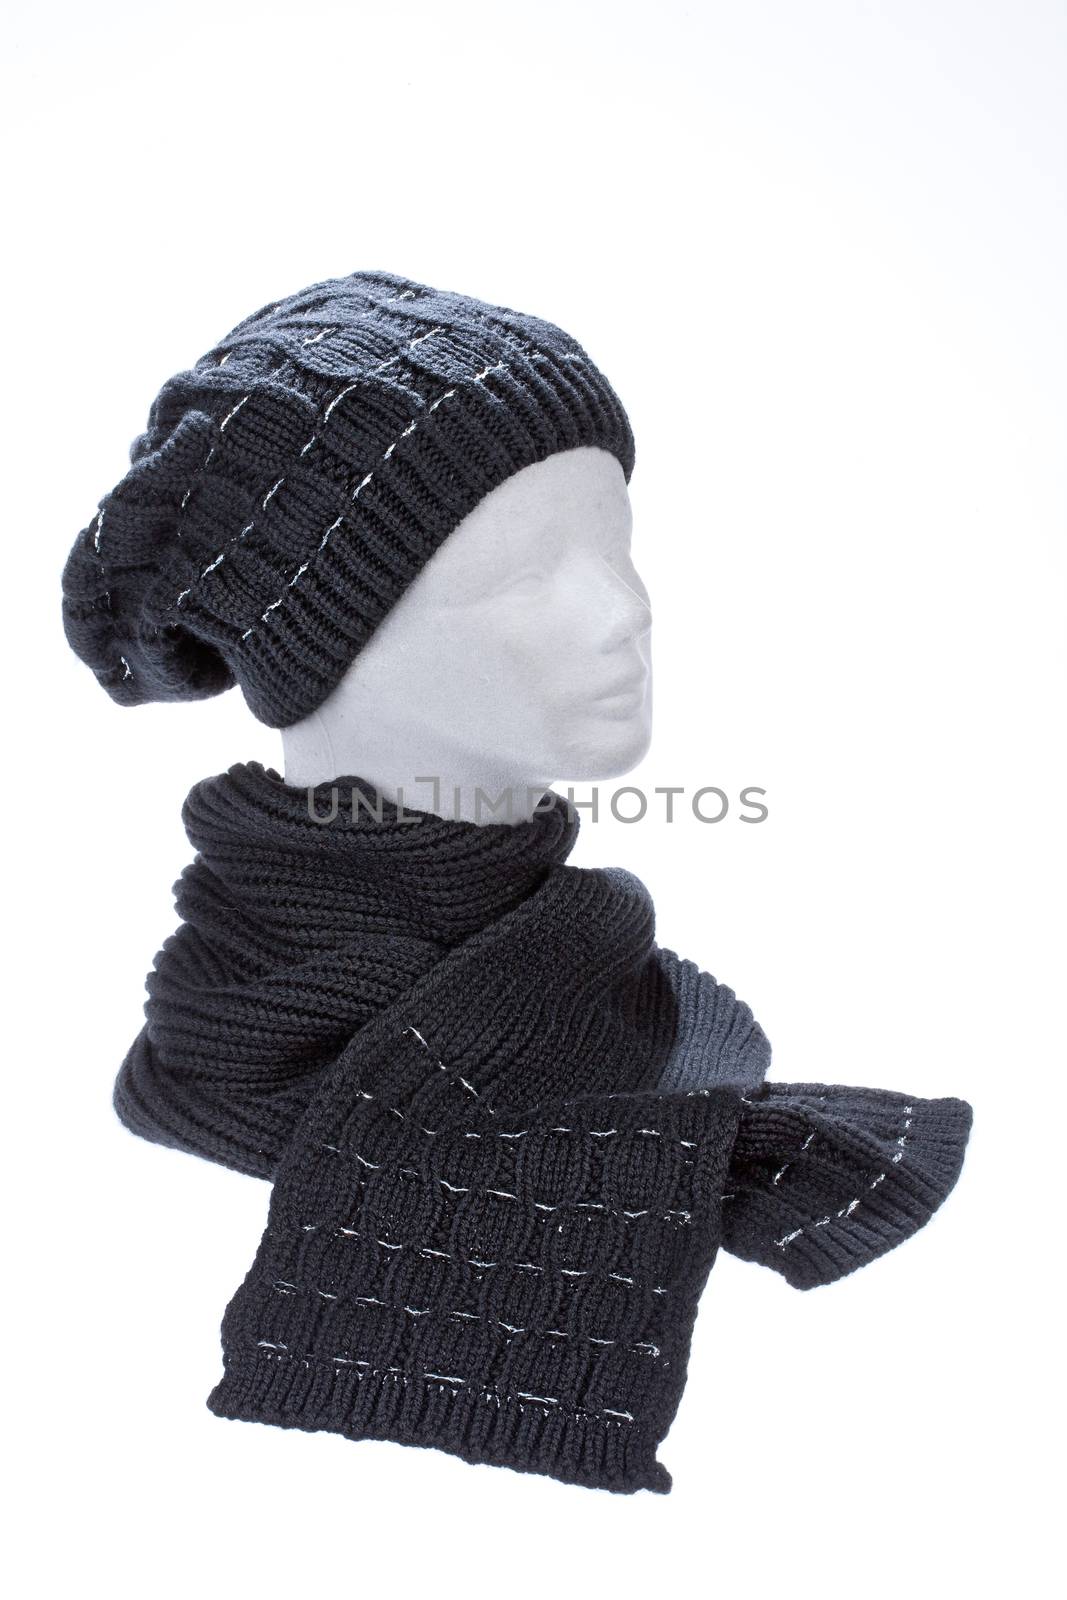 Knitted hat on isolated background